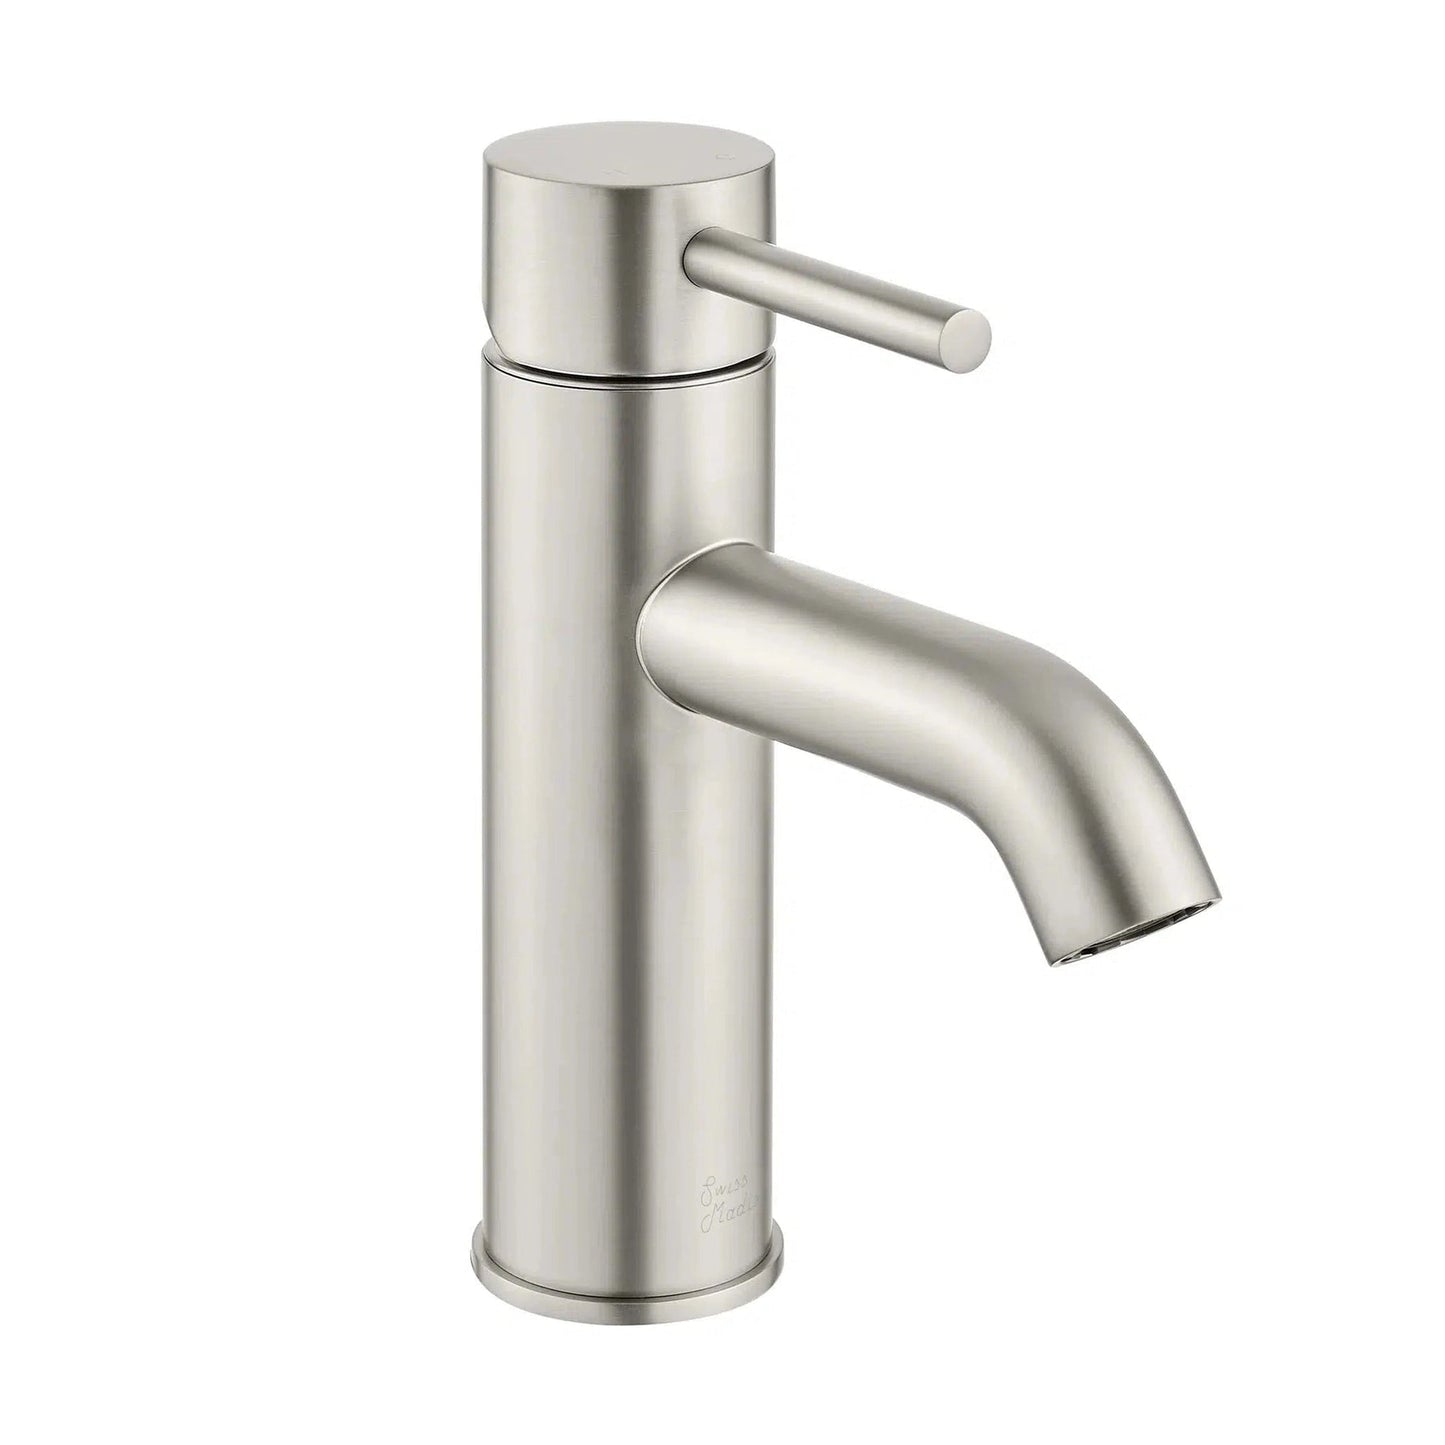 Swiss Madison Ivy 8" Single-Handle Brushed Nickel Bathroom Faucet With 1.2 GPM Flow Rate